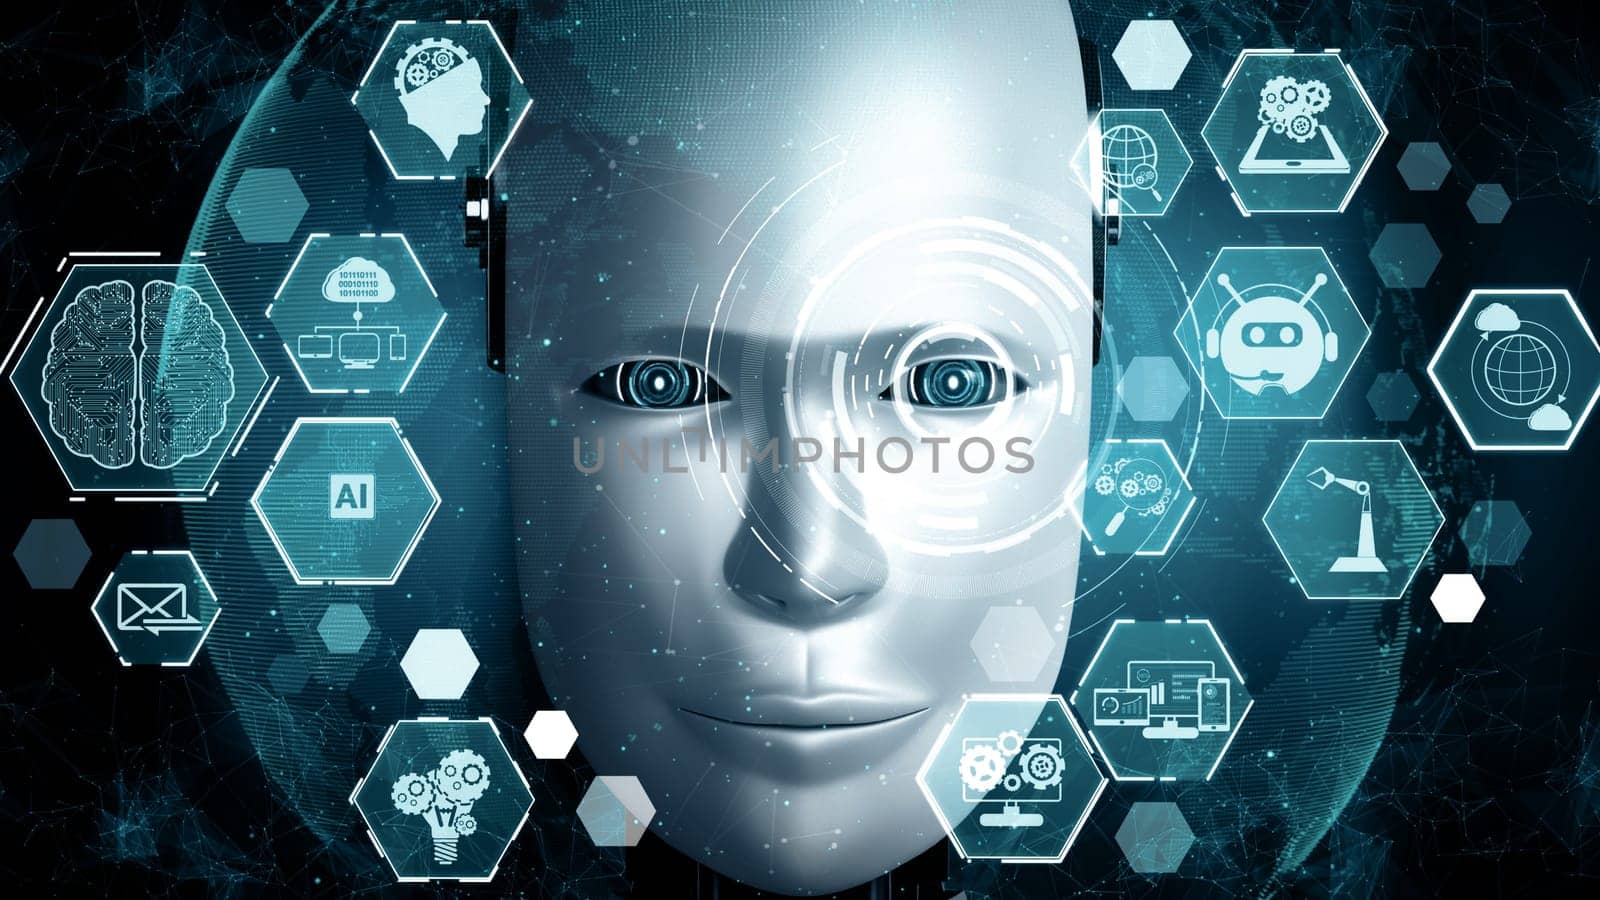 XAI 3d illustration Robot hominoid face close up with graphic concept of AI thinking brain , artificial intelligence and machine learning process for the 4th fourth industrial revolution. 3D rendering